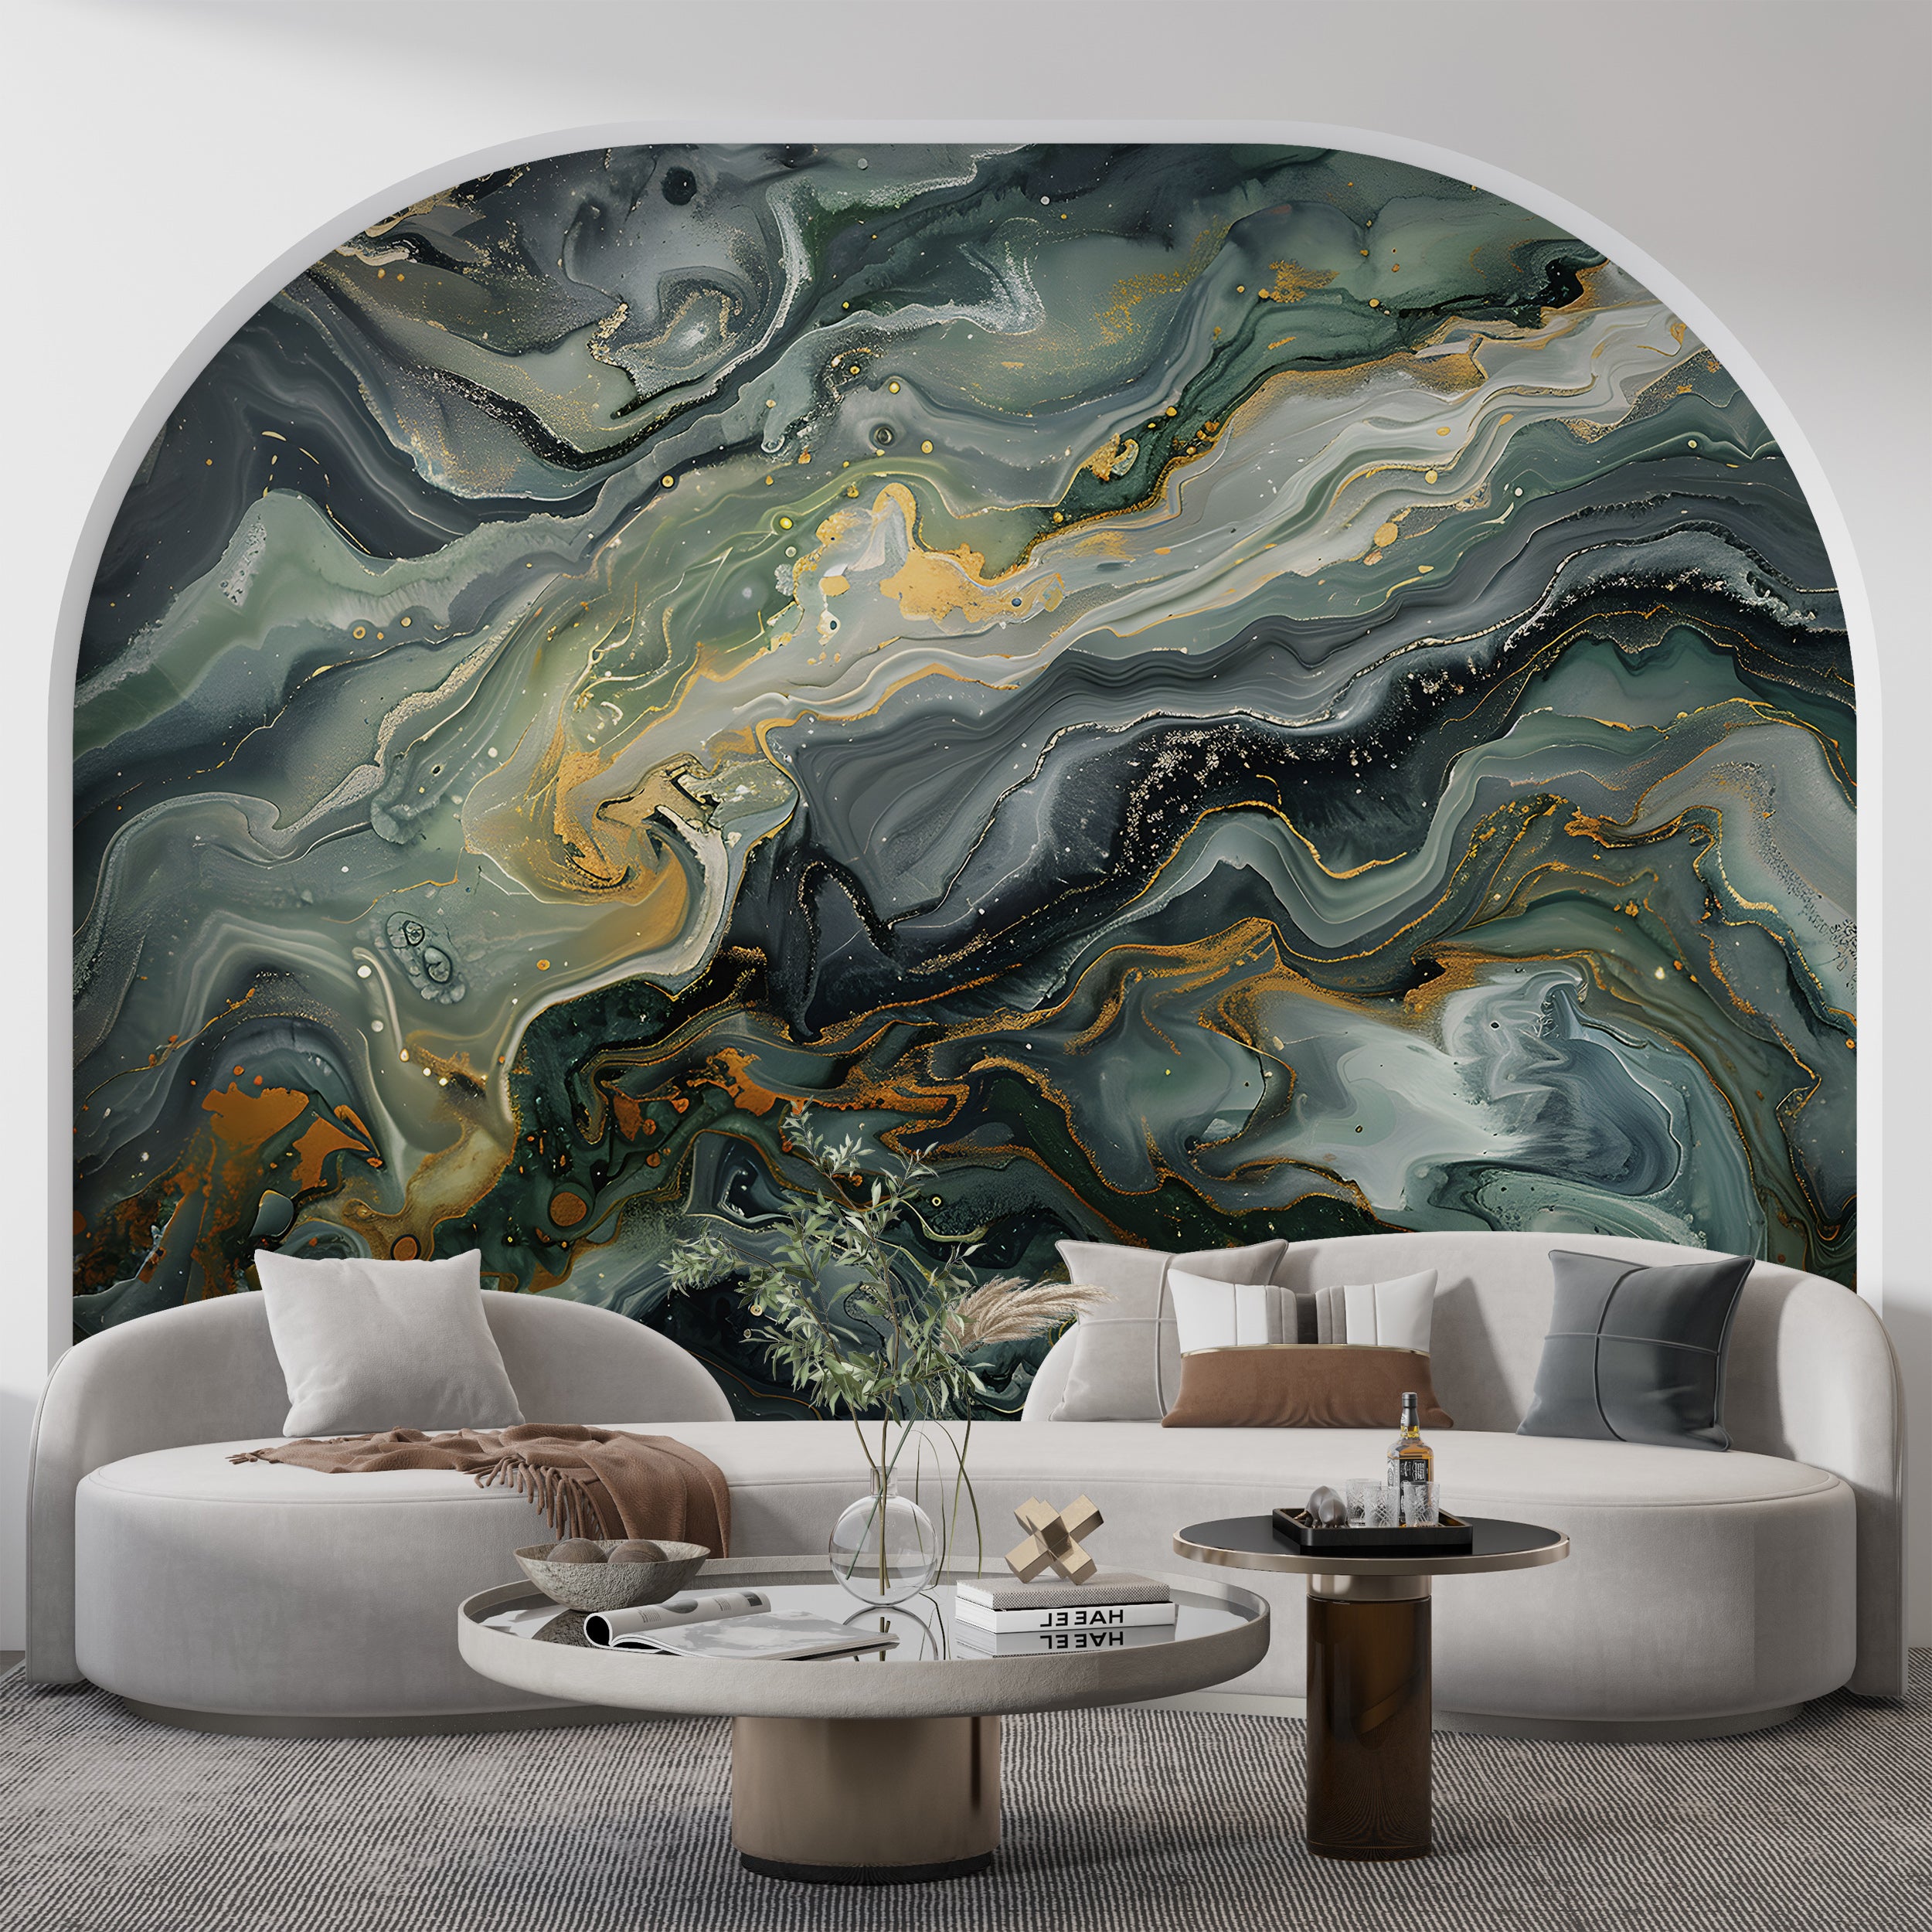 Deep Green Marble Mural, Alcohol Ink Abstract Wallpaper, Peel and Stick Dark Green Stone Texture Art, Removable Marble Sticker Decor